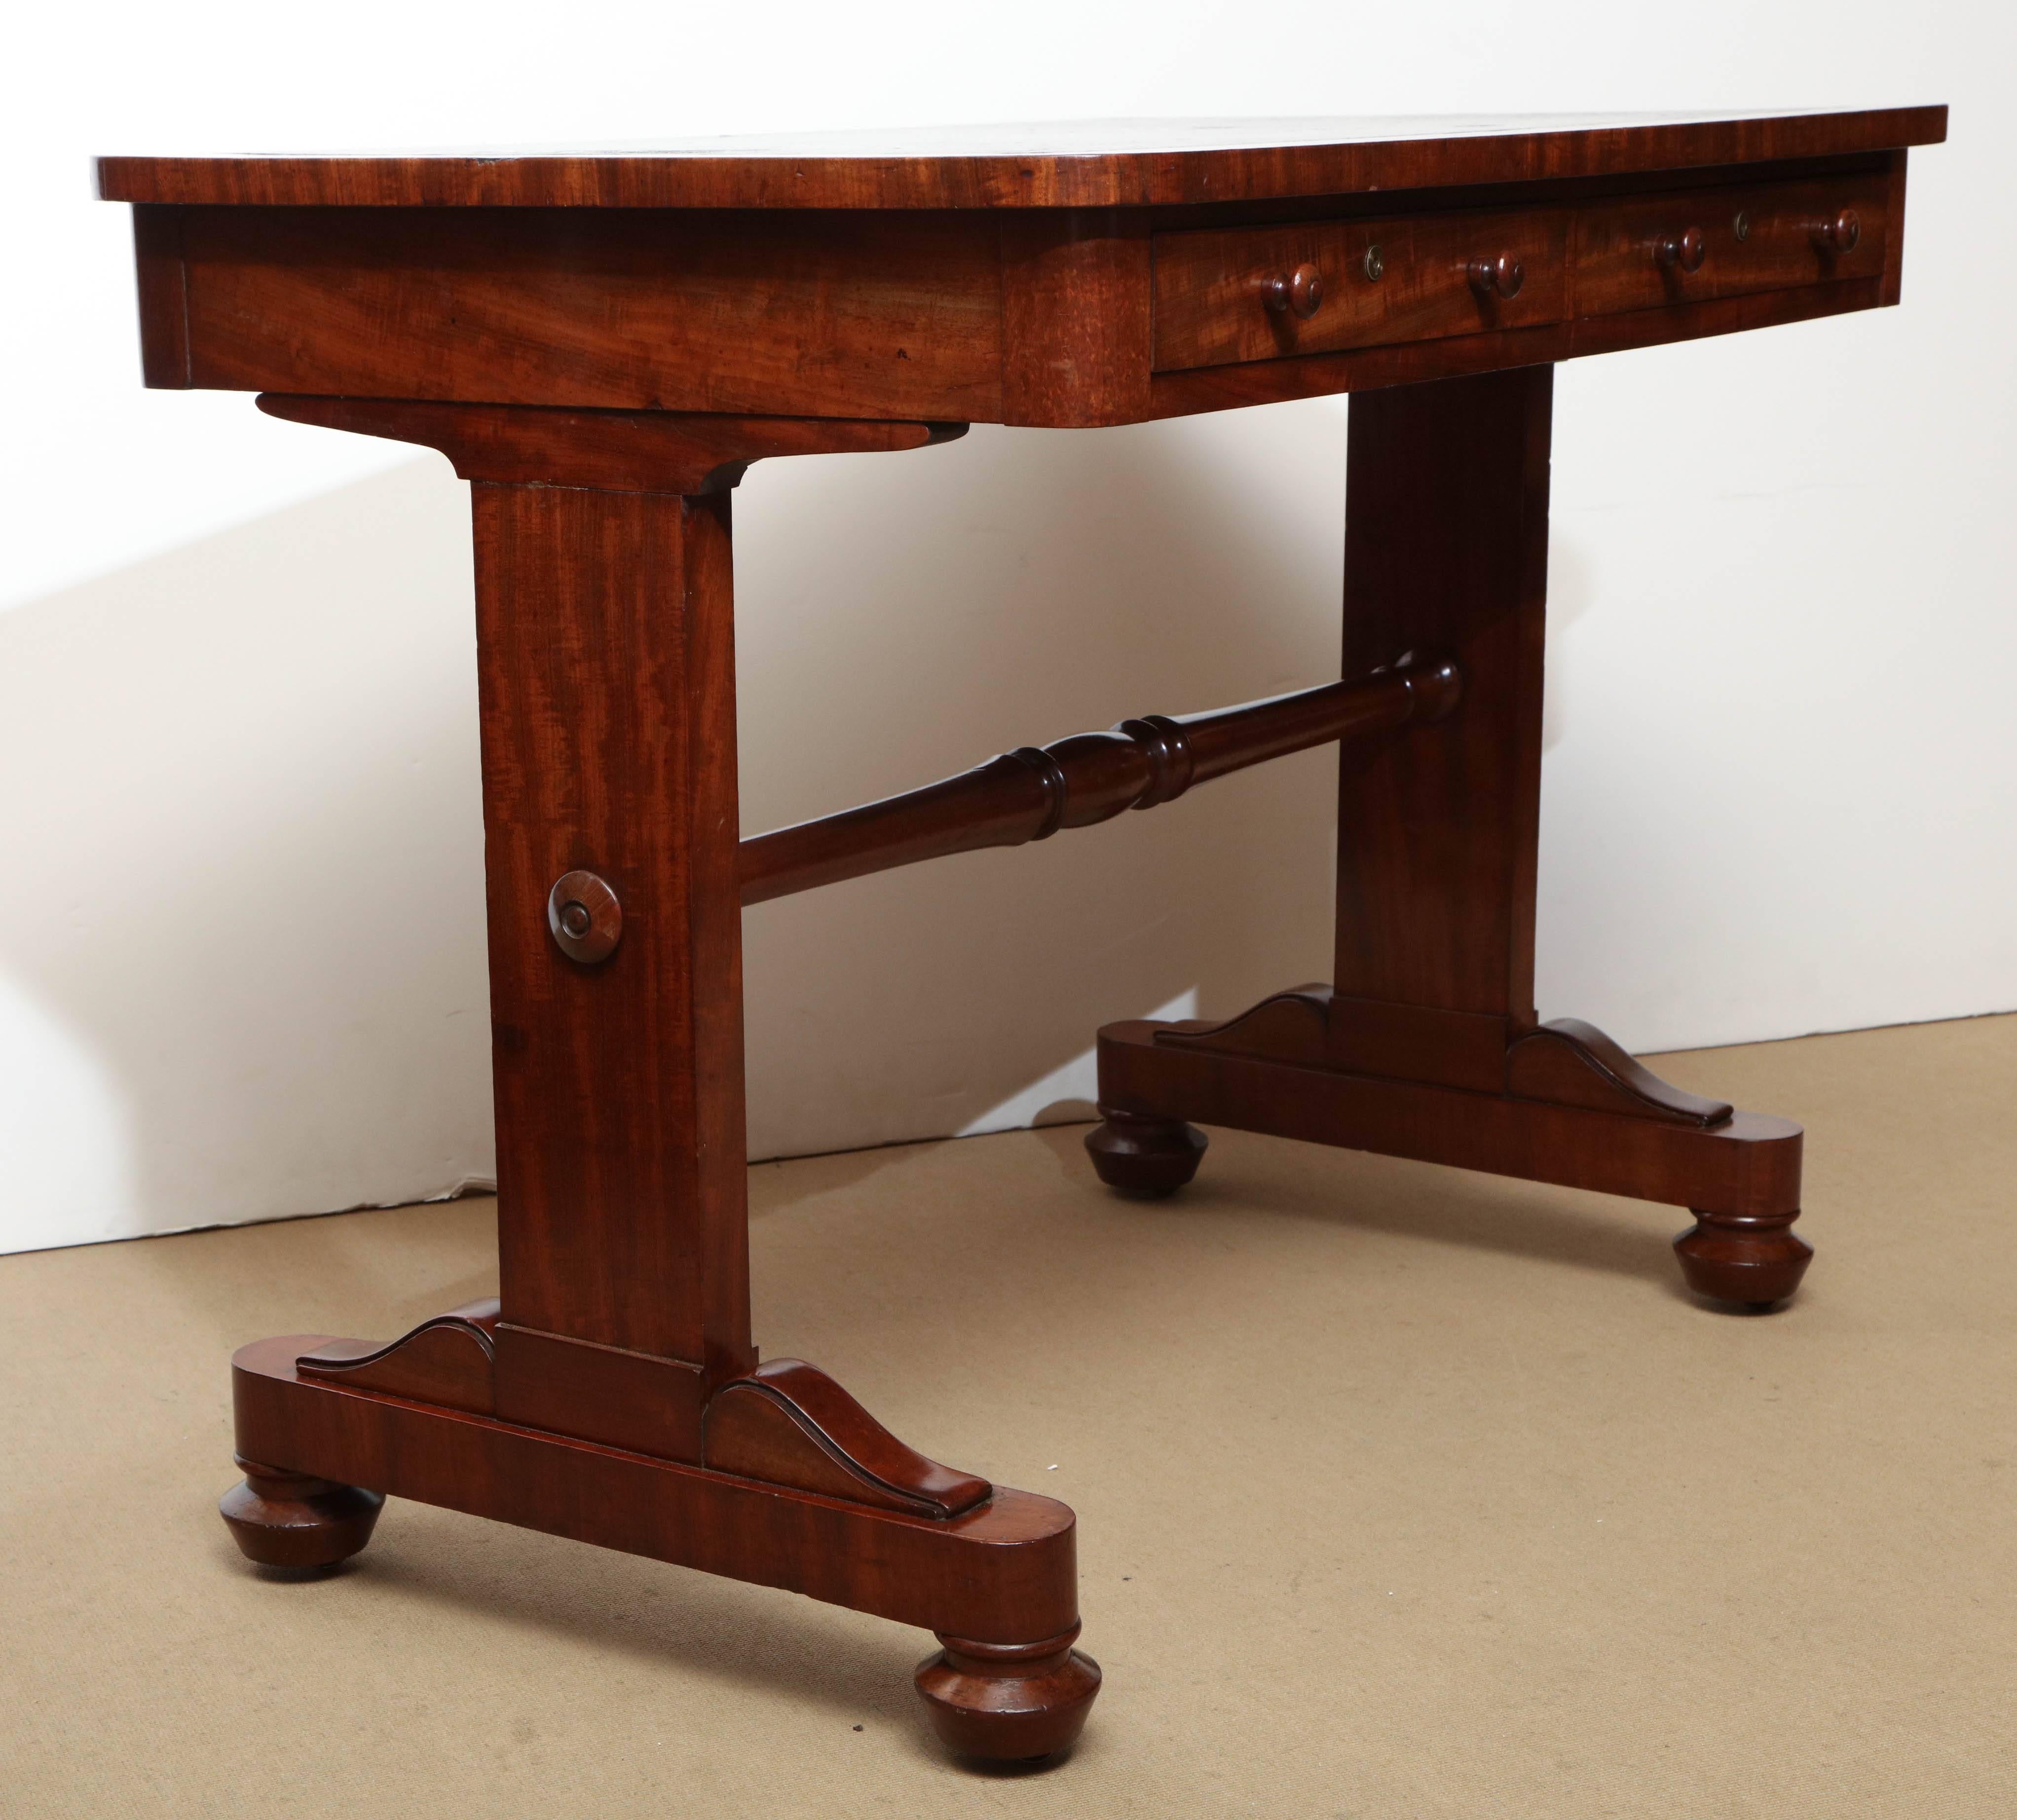 Early 19th Century English, Mahogany and Leather Top Desk by Gillows & Co 1